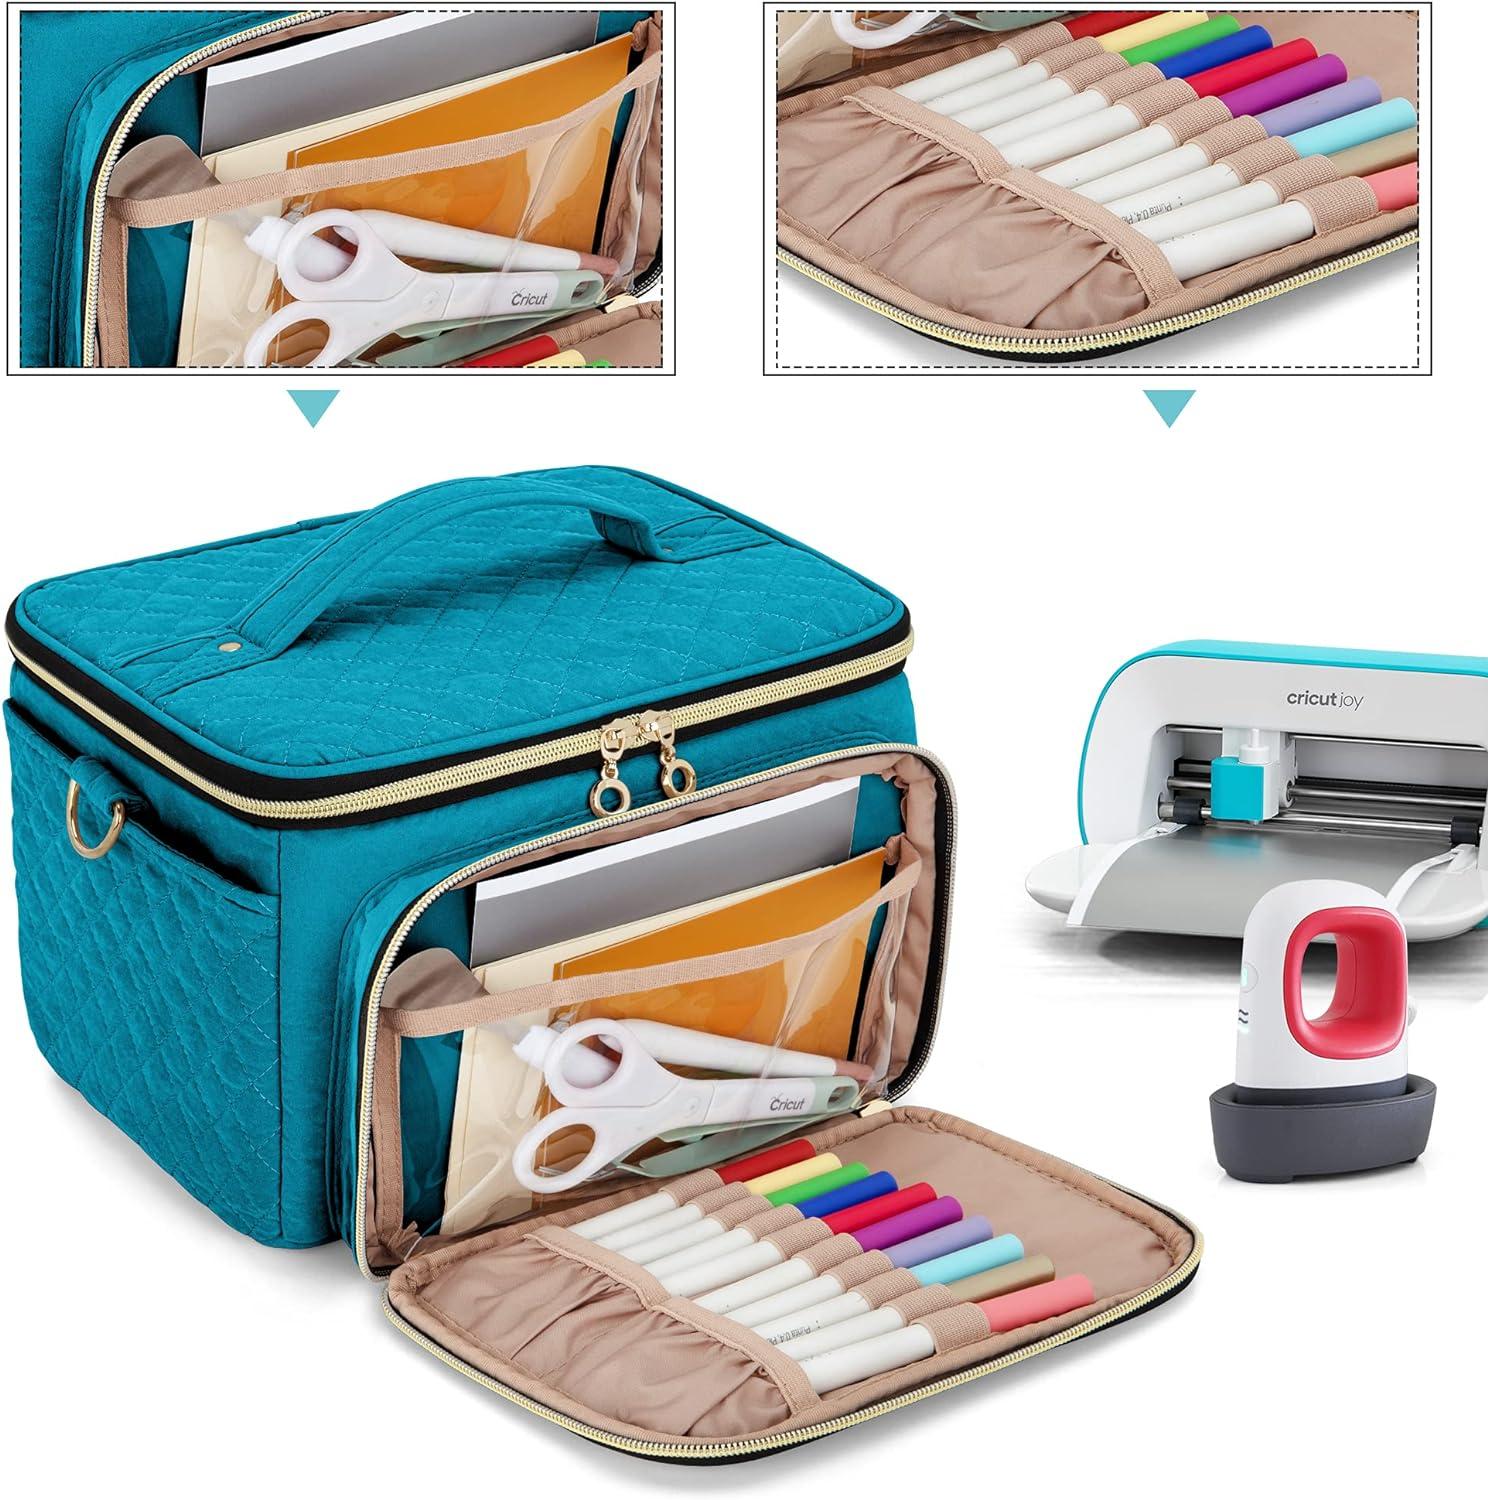 LUXJA Carrying Case Compatible with Cricut Joy and Easy Press Mini Carrying  Bag with Supplies Storage Sections Teal